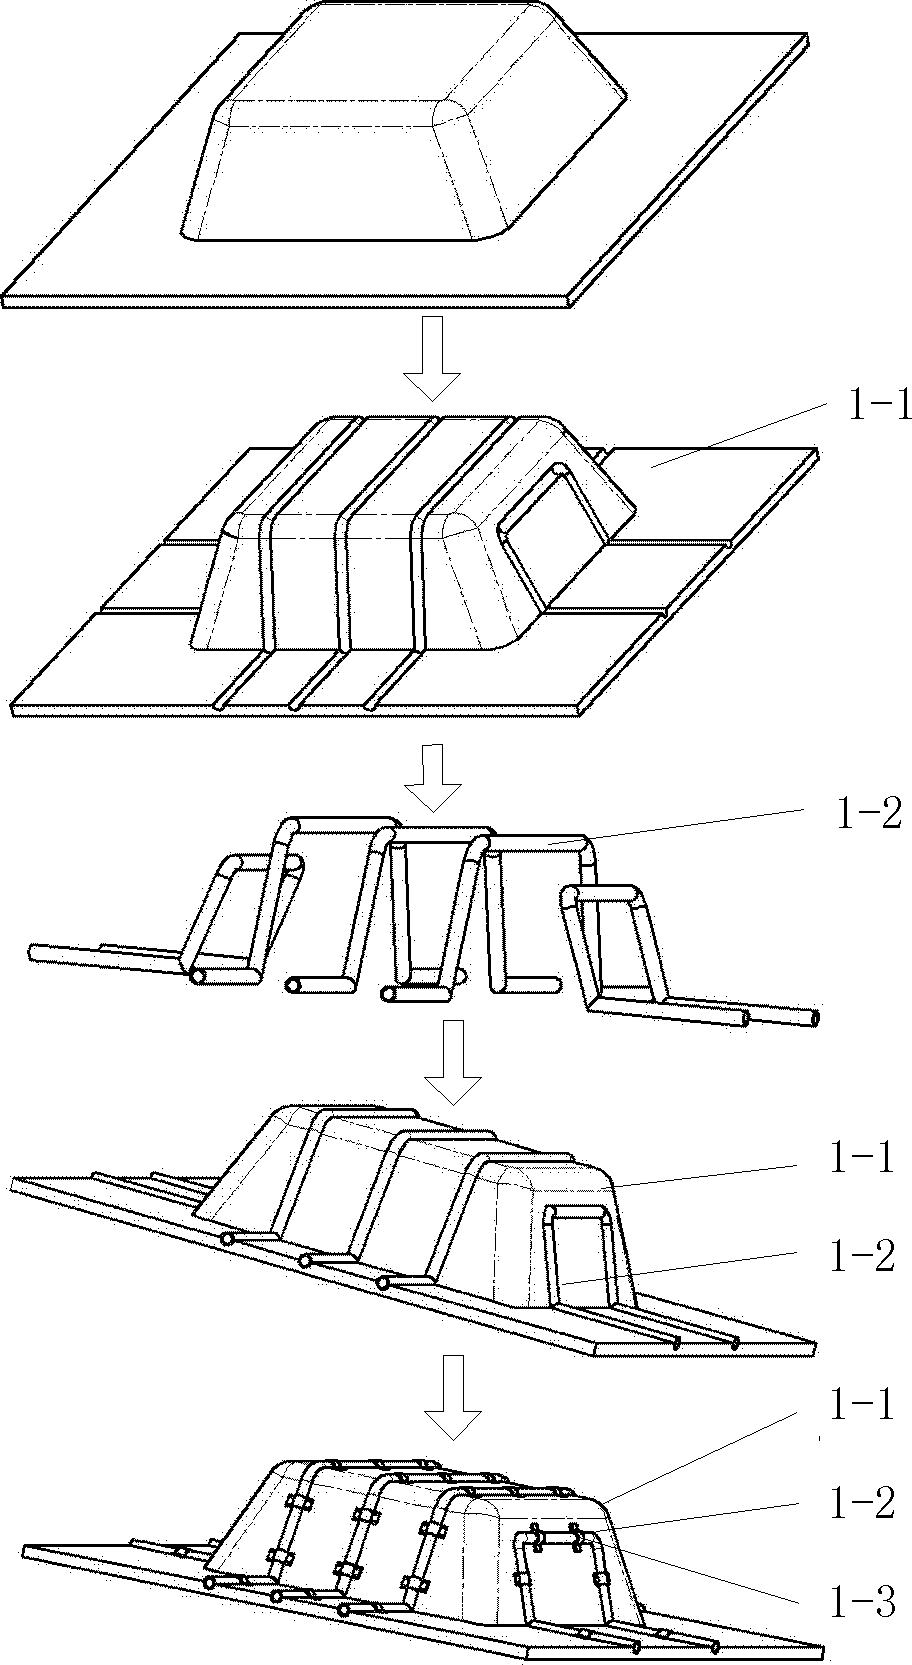 Device and method for forming fiber reinforced resin-based composite material plate through hot stamping